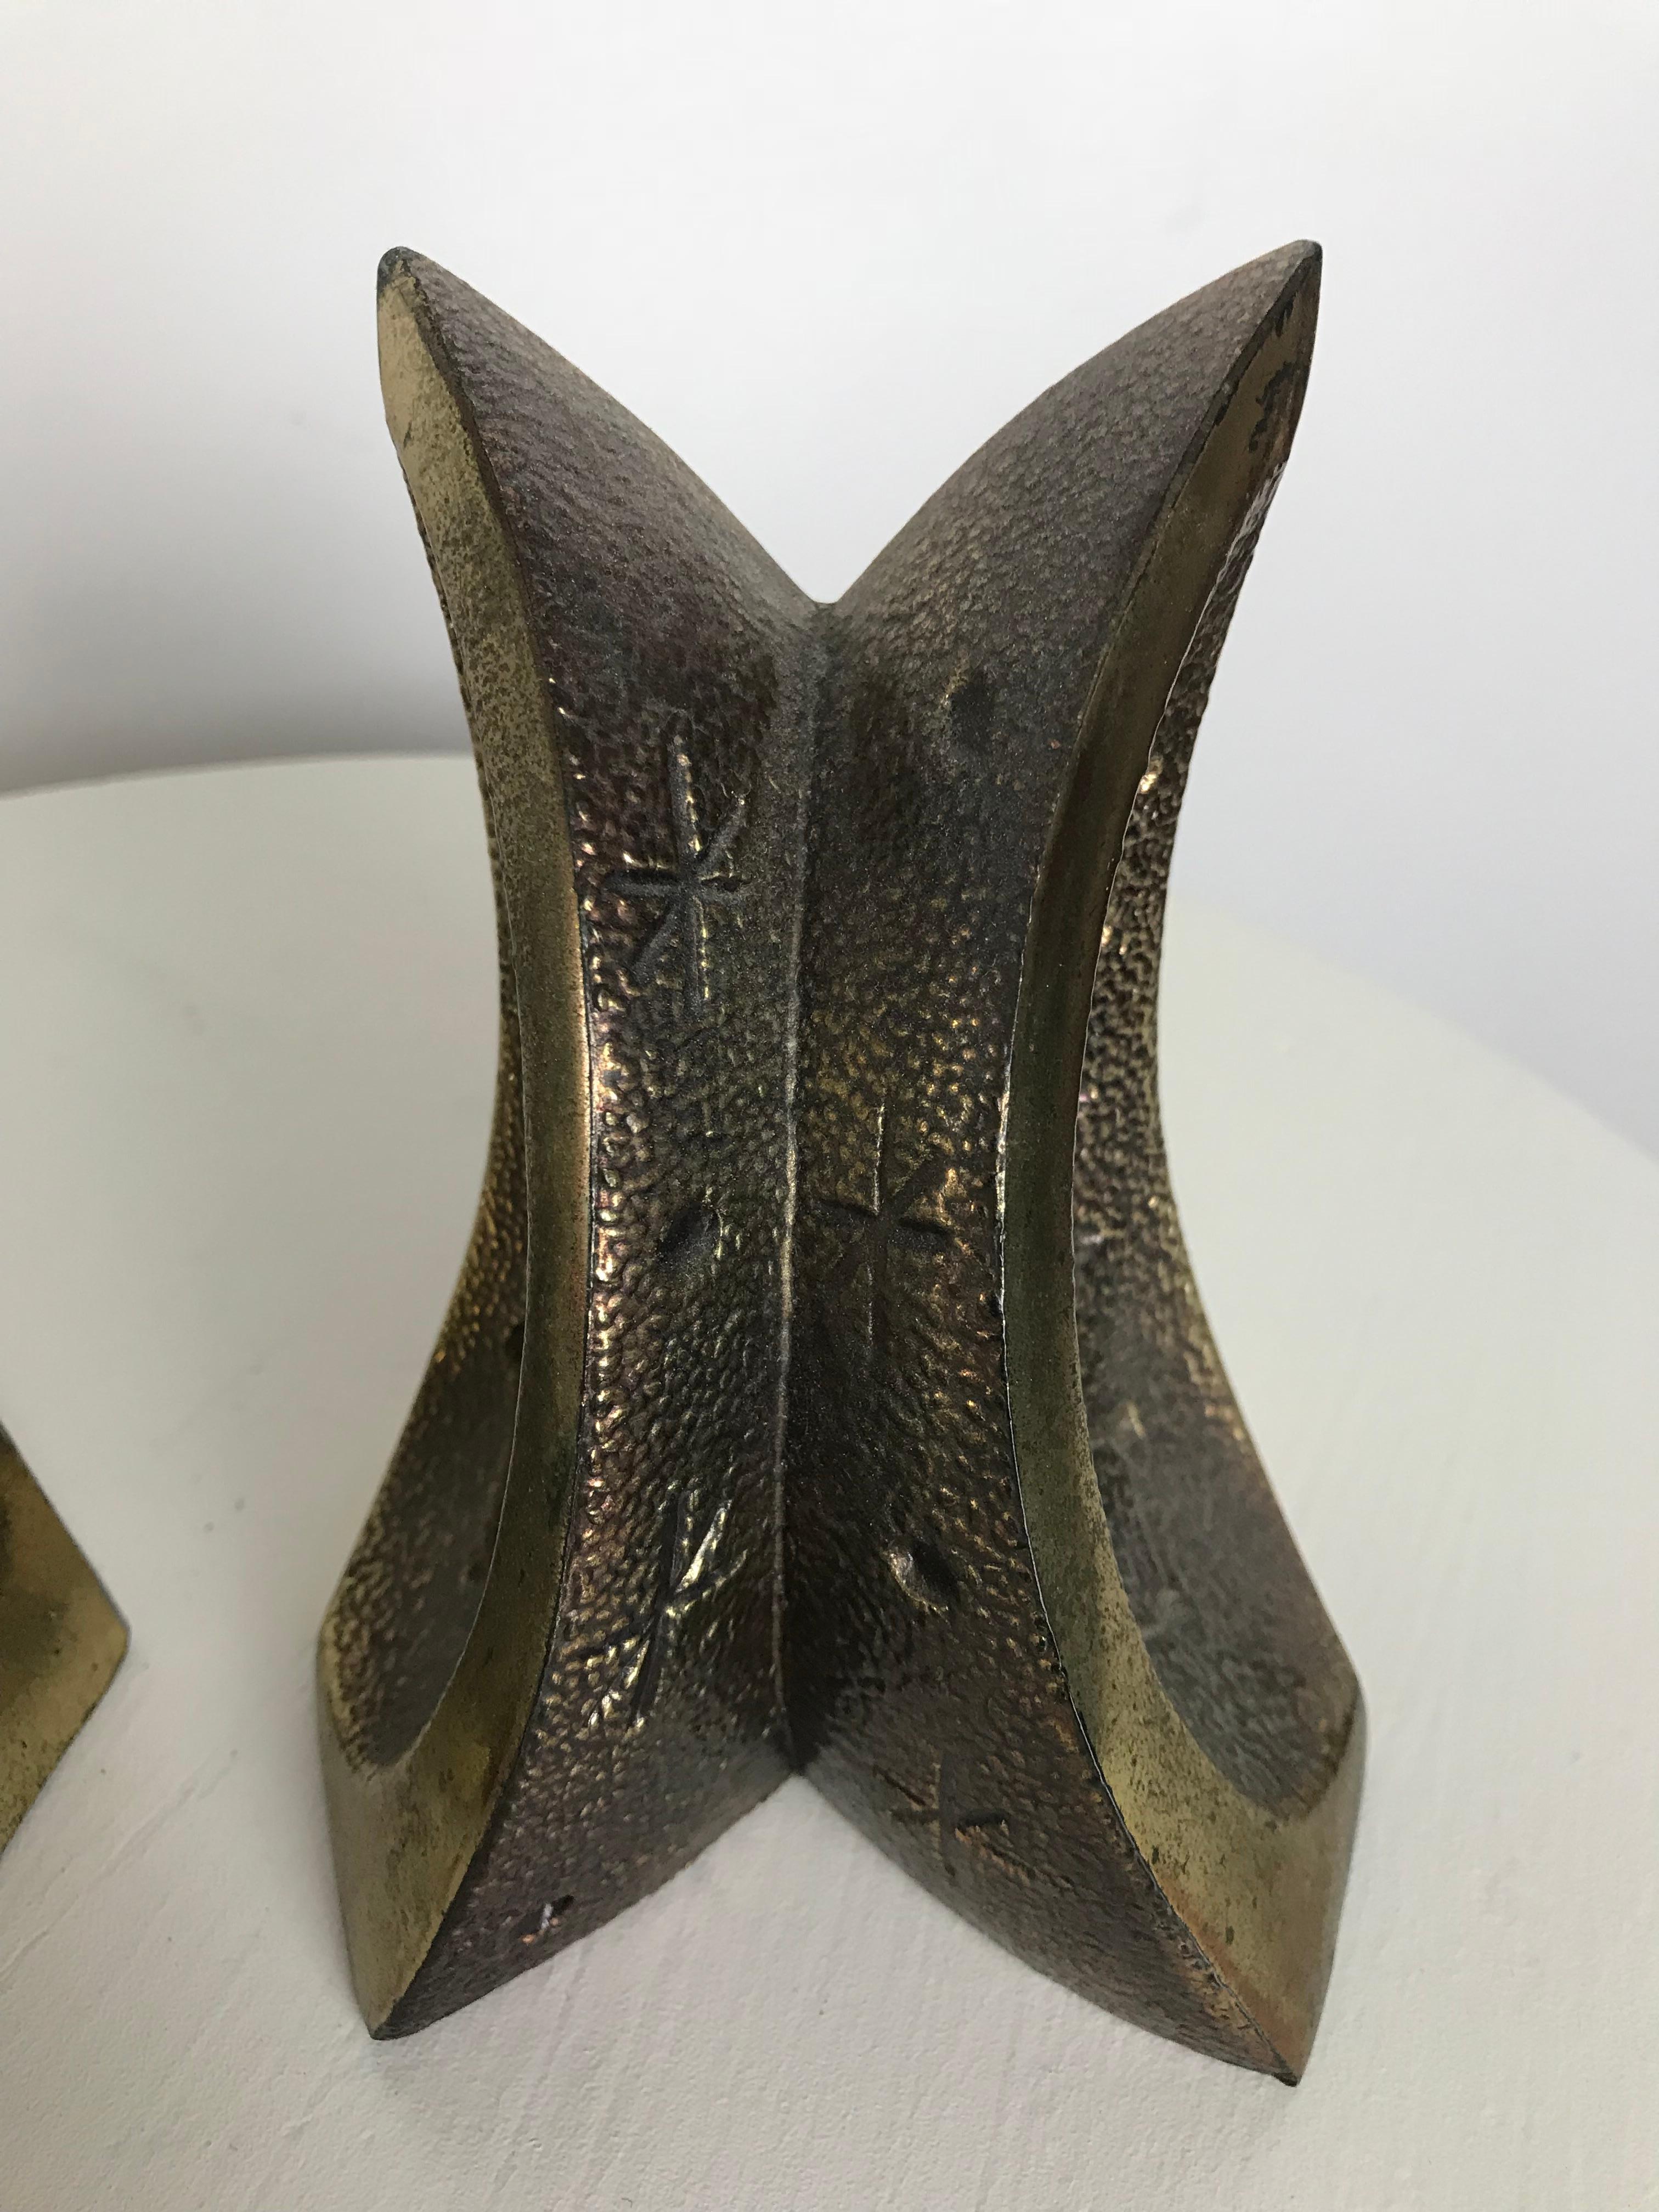 Mid-20th Century Mid Century Modern Bookends with Etched Modernist Designs After Ben Seibel